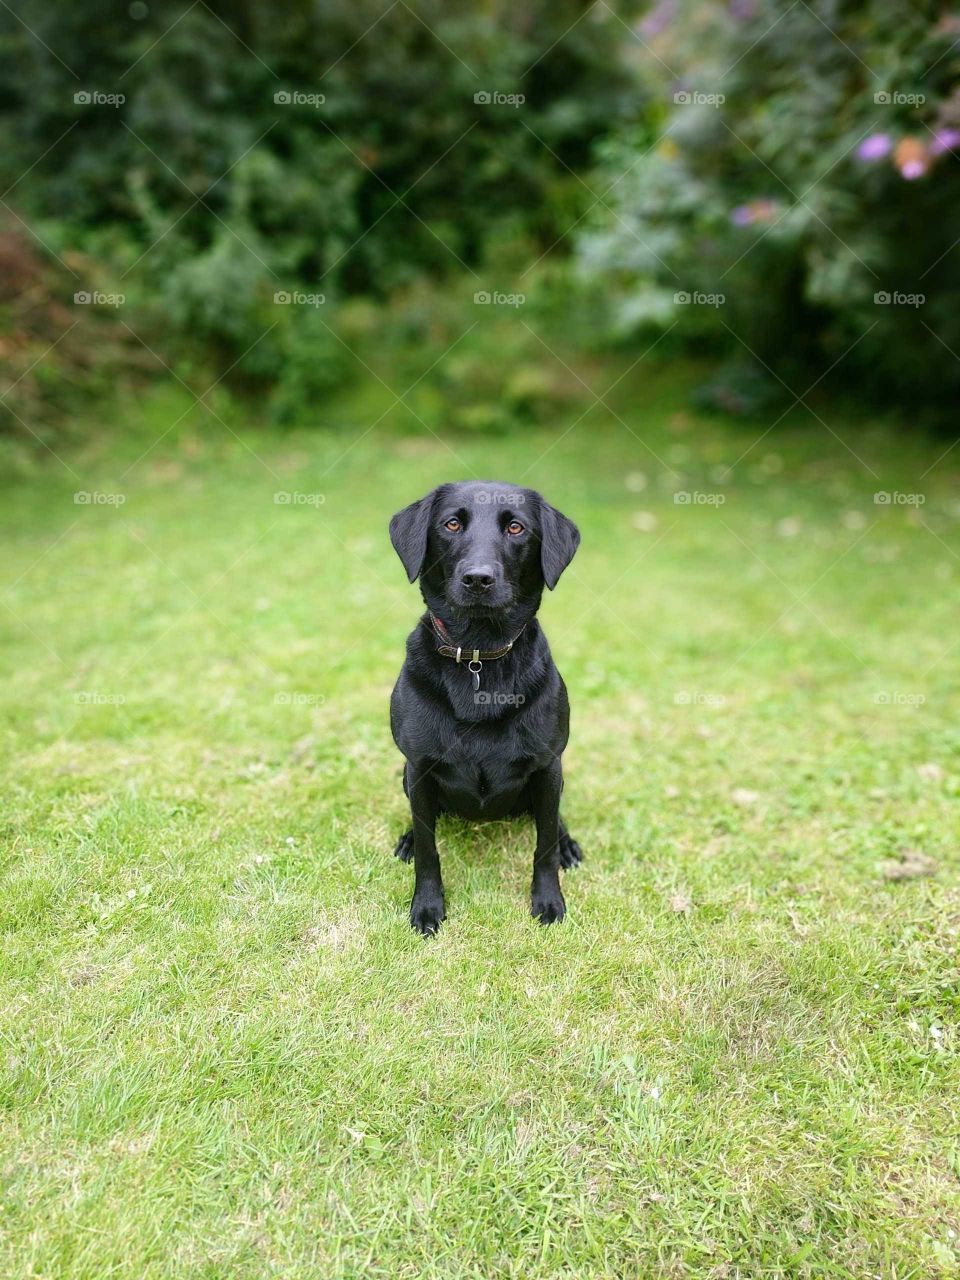 Kipper the dog running and 110% dog in a garden with an out of focus background.